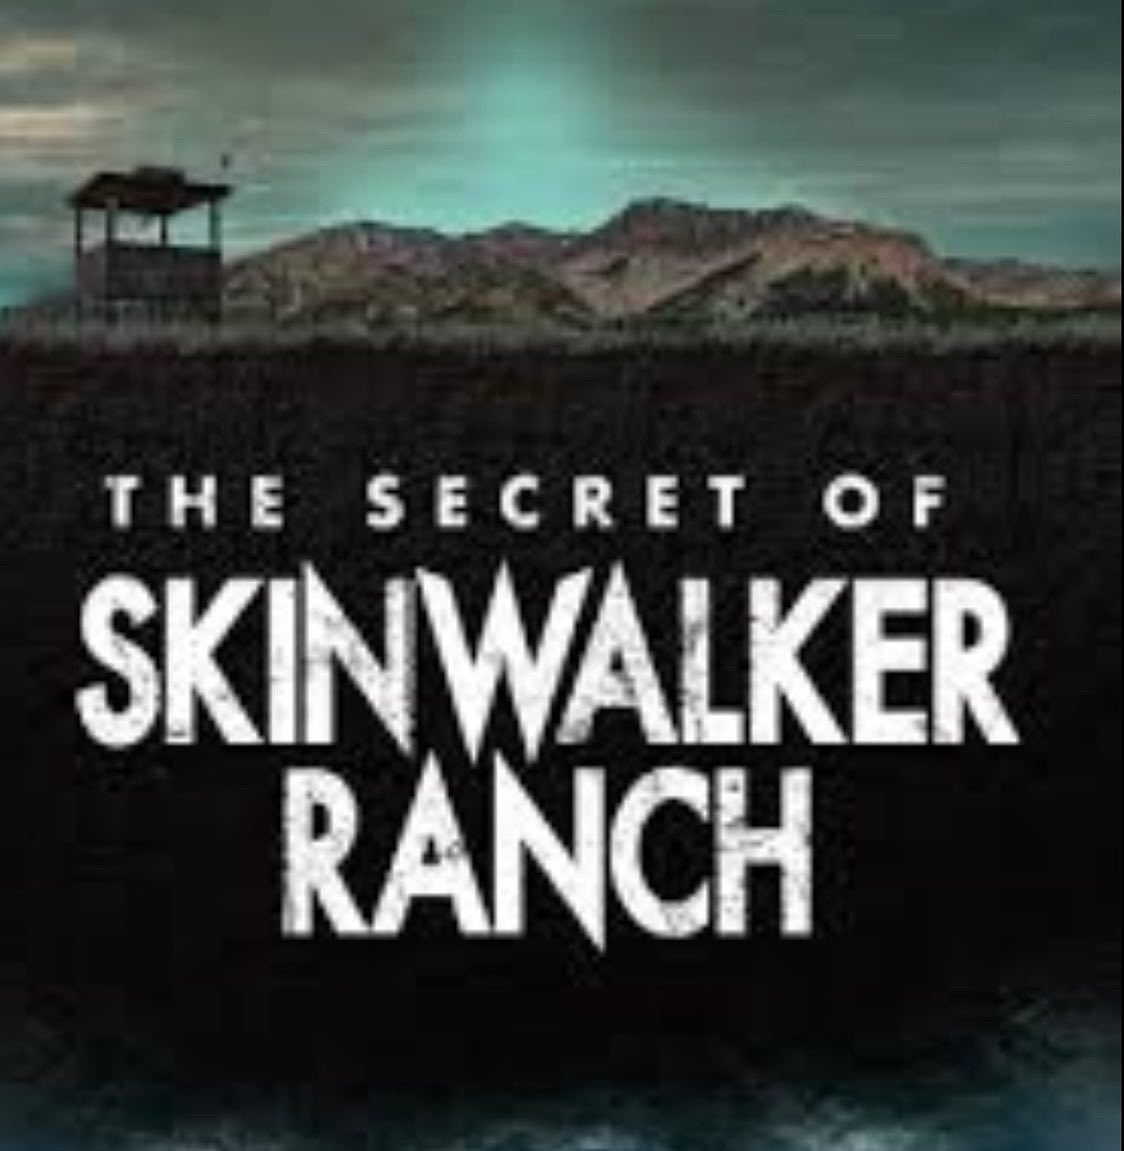 We are BACK with a brand new season!

THIS WEEK: NOPE

NEXT: The Wretched 

And THEN: We speak to Matty’s pals who are on location & make THE SECRET OF SKIN WALKER RANCH!

 #paranormalpodcast #filmreview #curseofoakisland #secretofskinwalkerranch #behindthescenes